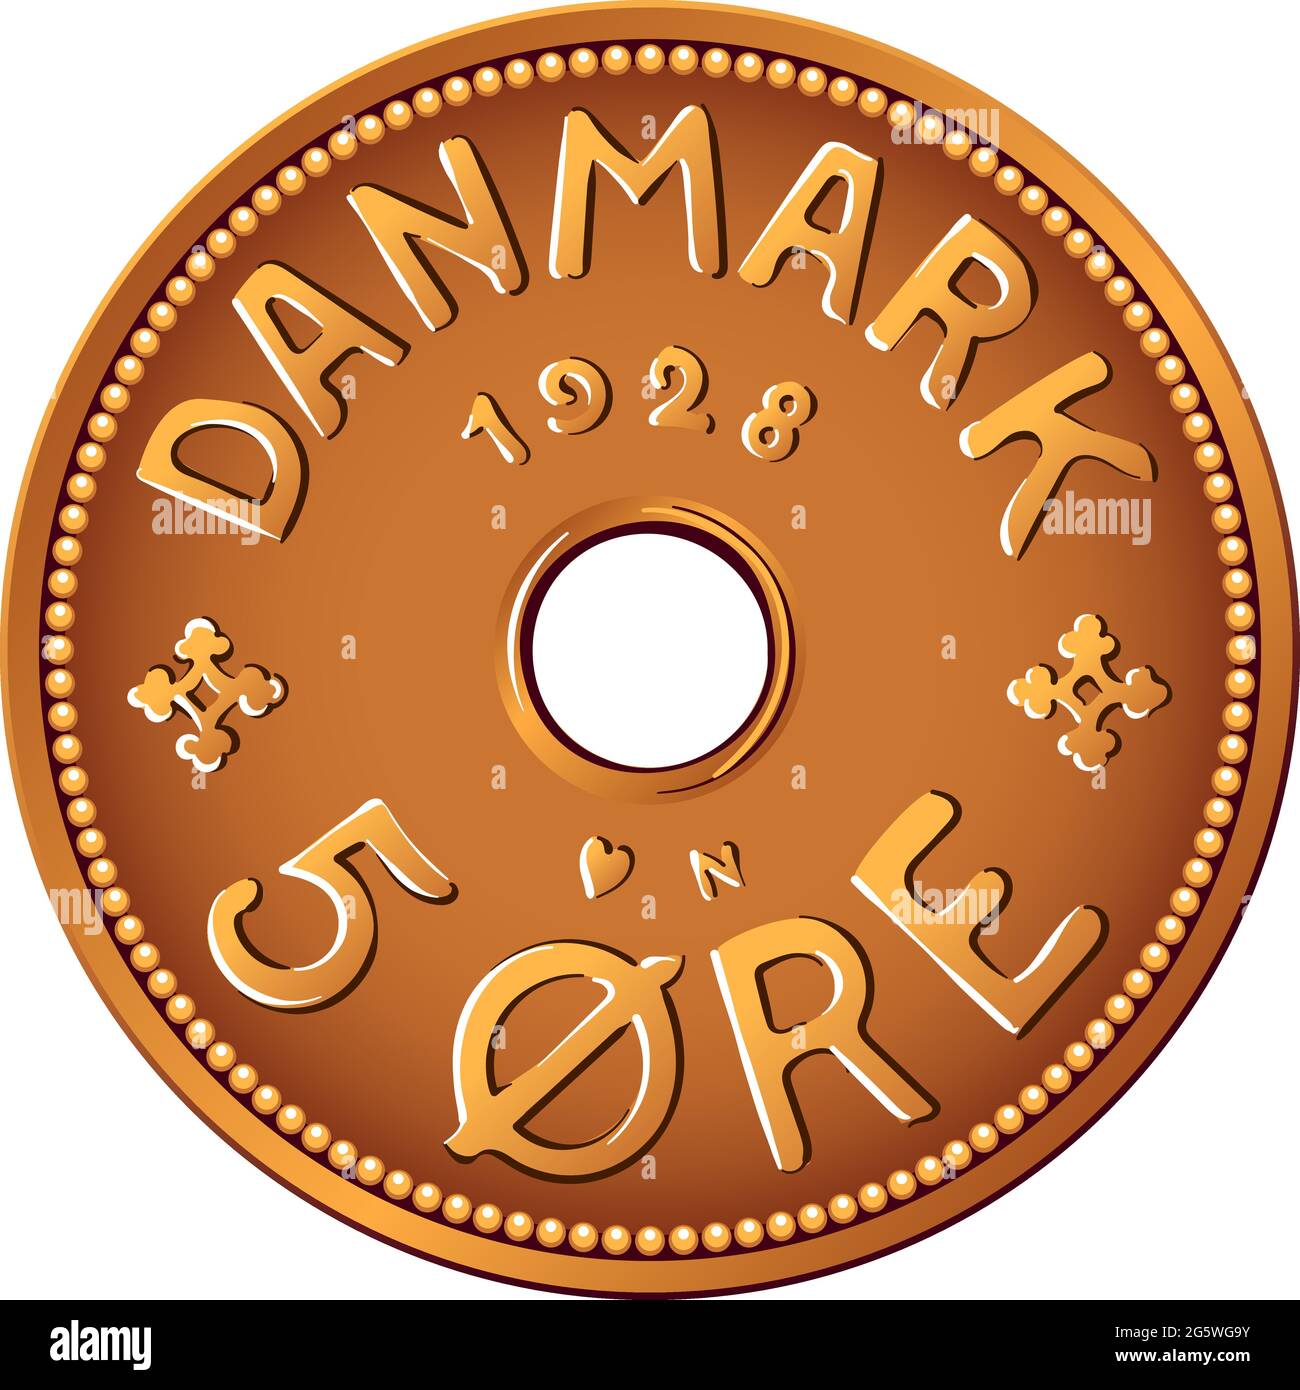 Obverse of Danish money tin-bronze 5 ore coin. Krone, official currency of Denmark, Greenland, and the Faroe Islands. Stock Vector